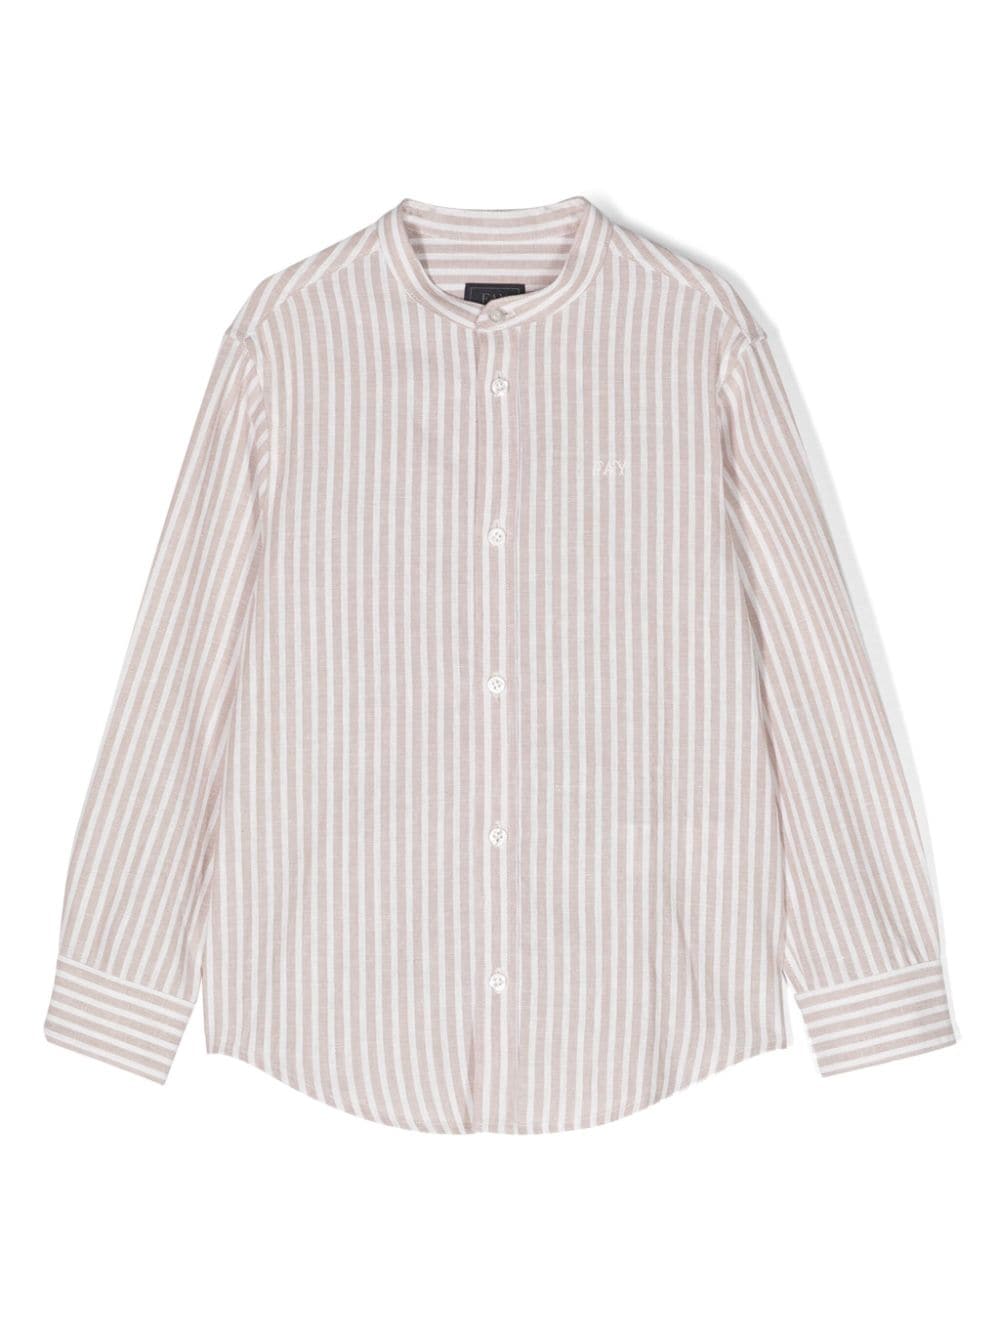 Beige and white shirt for boys with logo